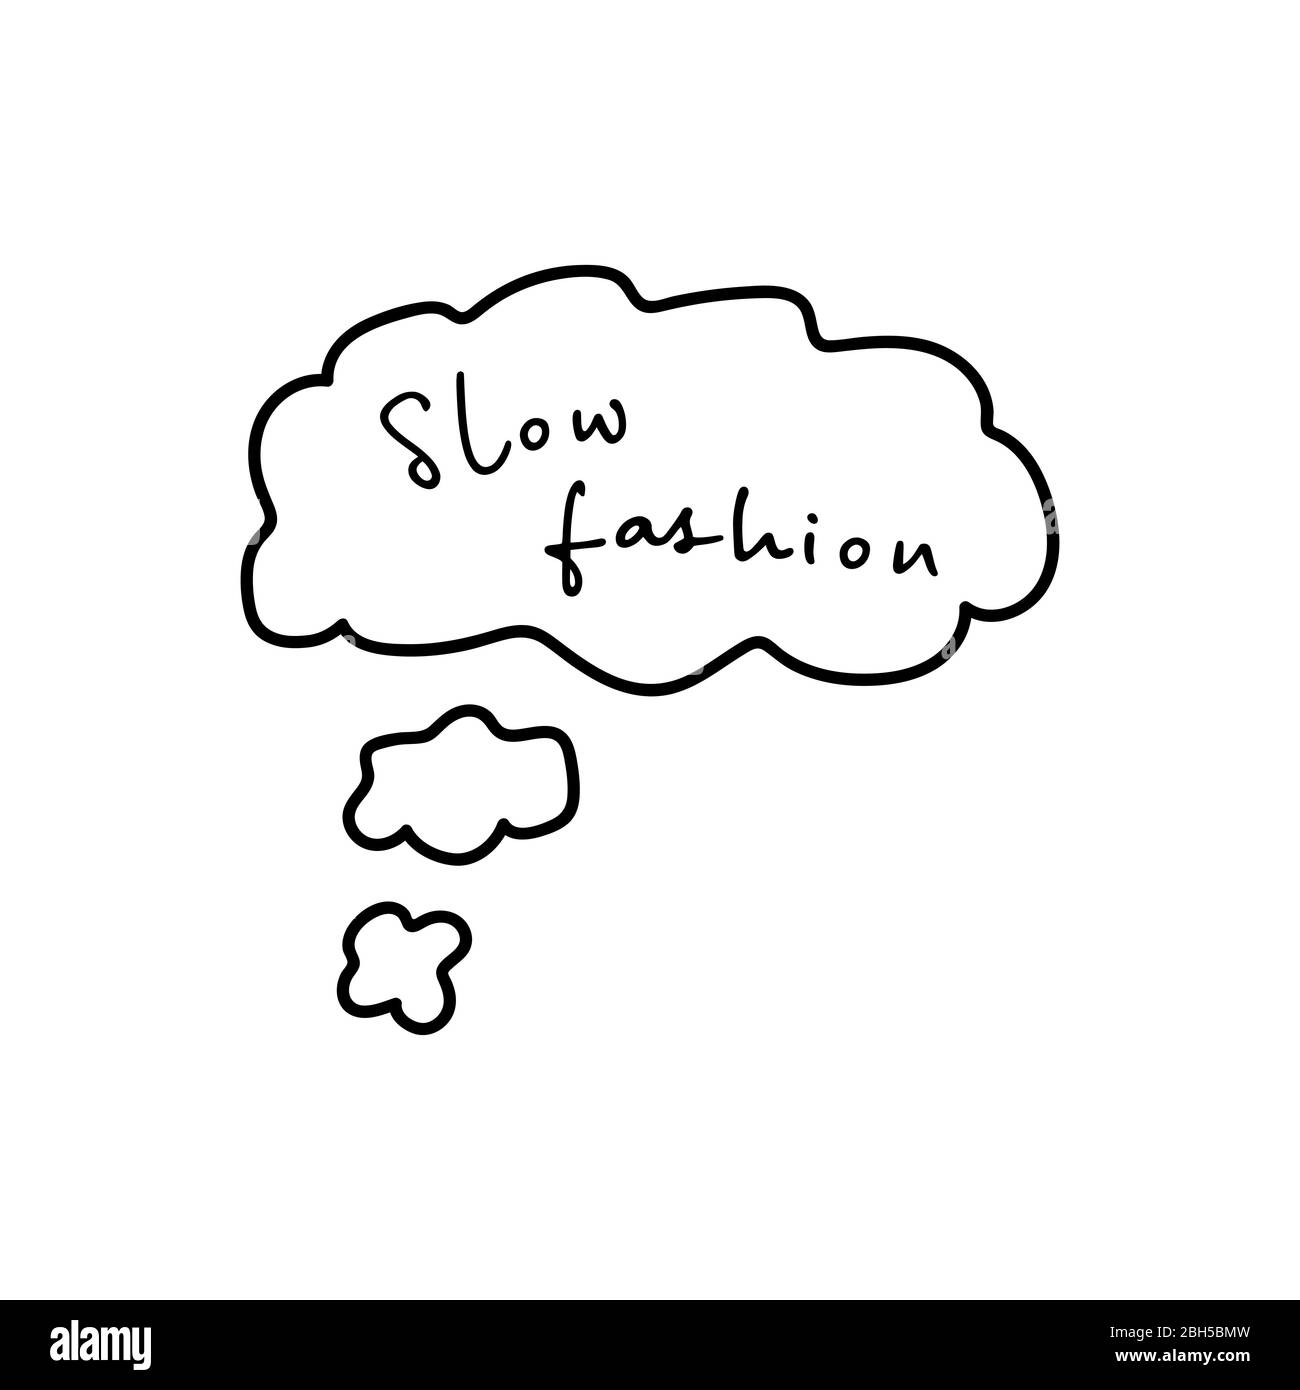 Slow fashion handwritten title in thought cloud. Vector illustration. Stock Vector